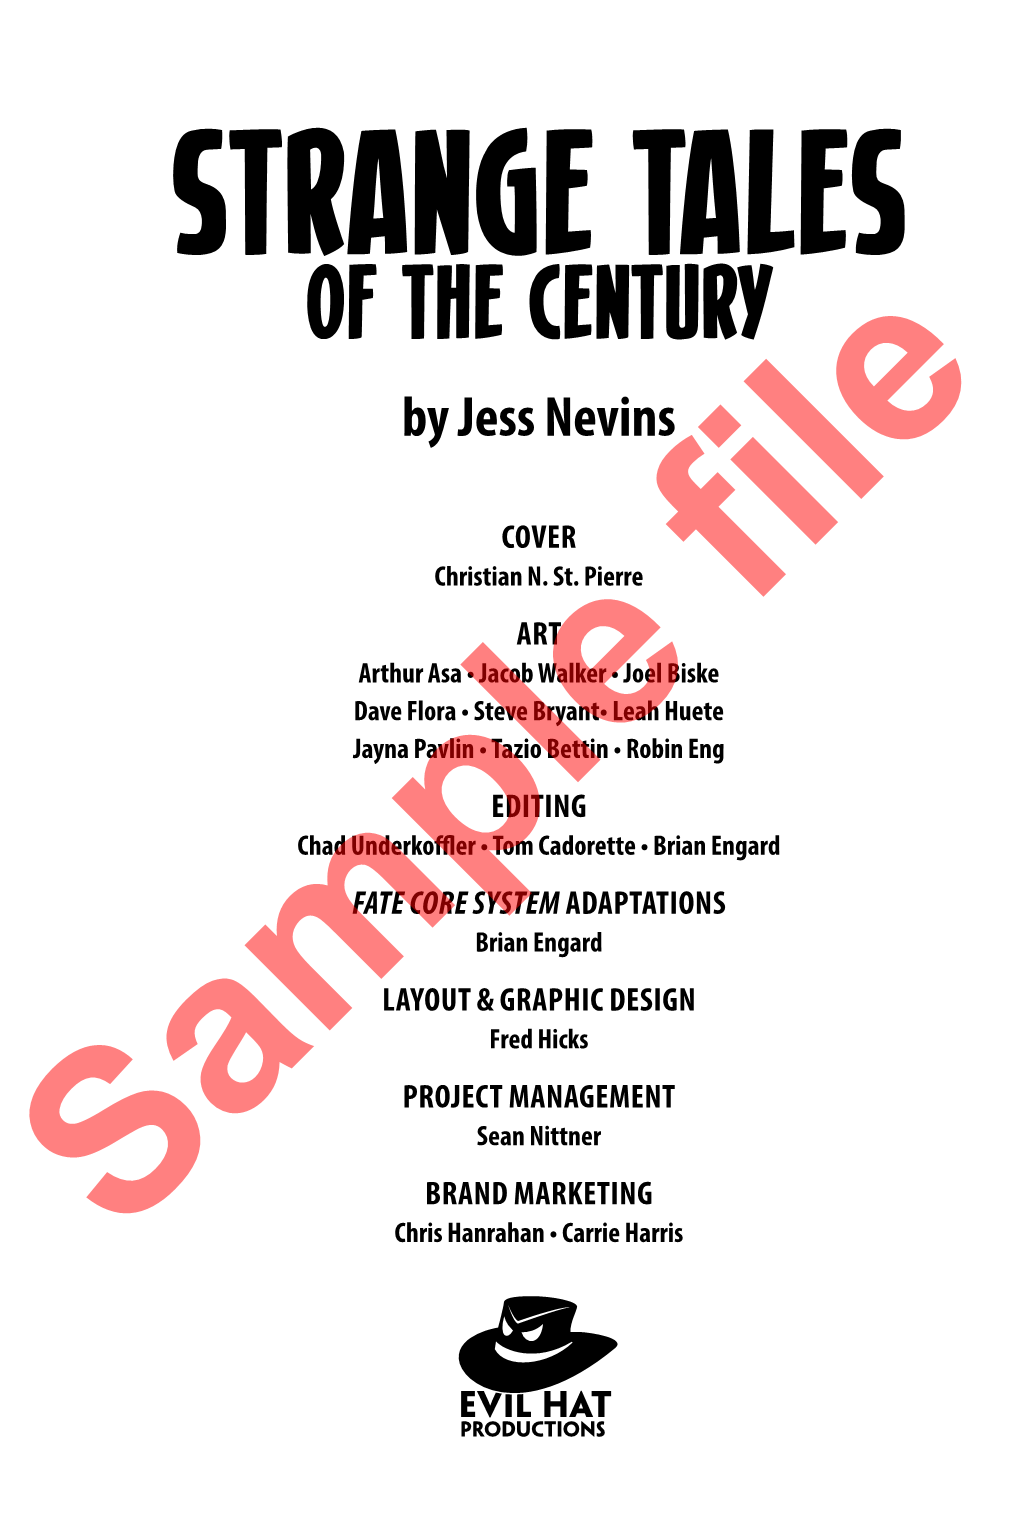 OF the CENTURY TALES by Jess Nevins